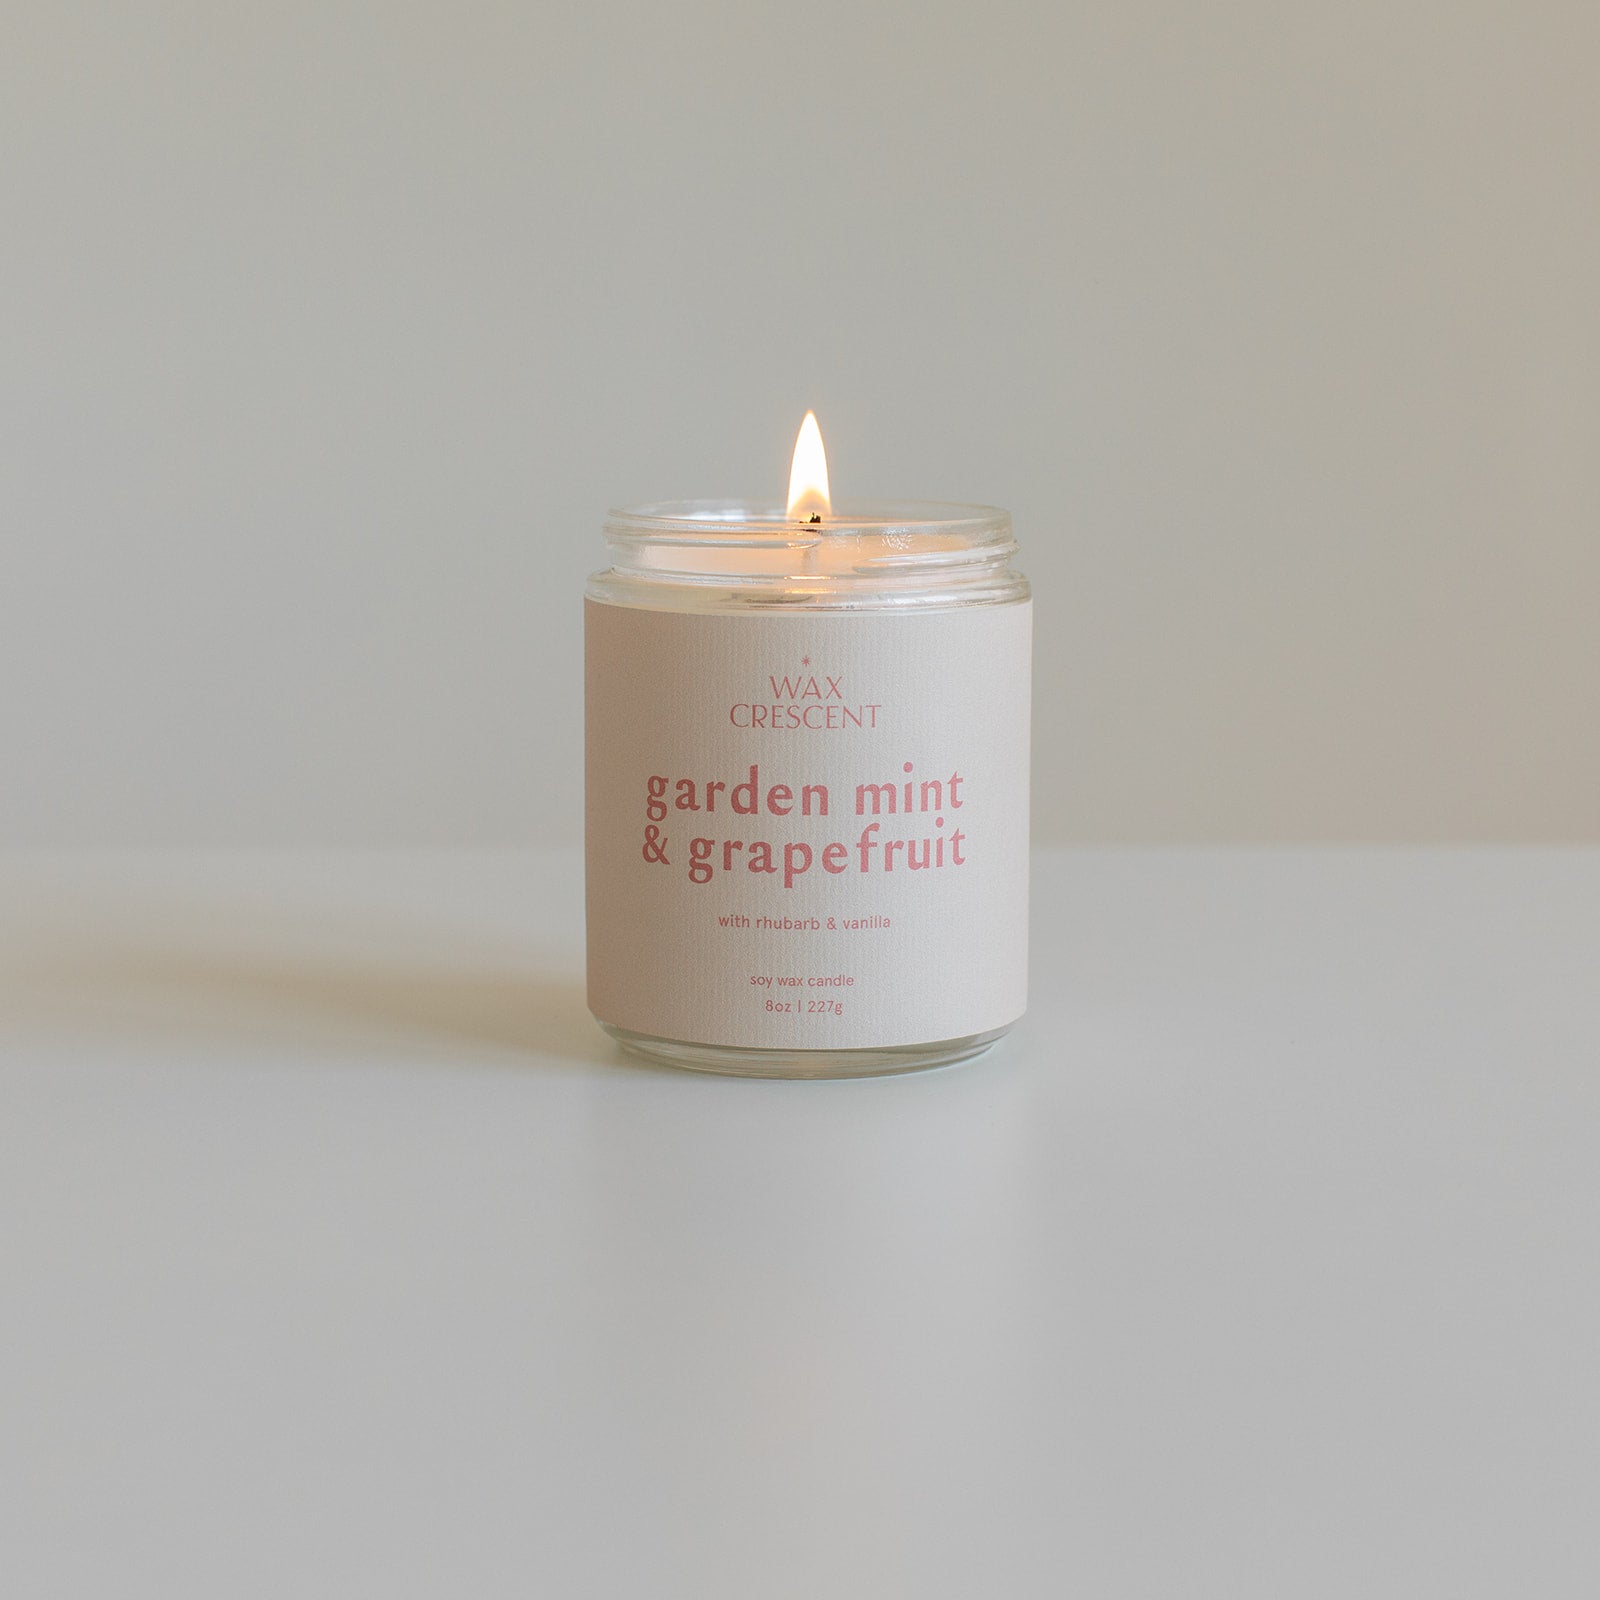 luxury soy wax candle made with non-toxic fragrance and essential oils